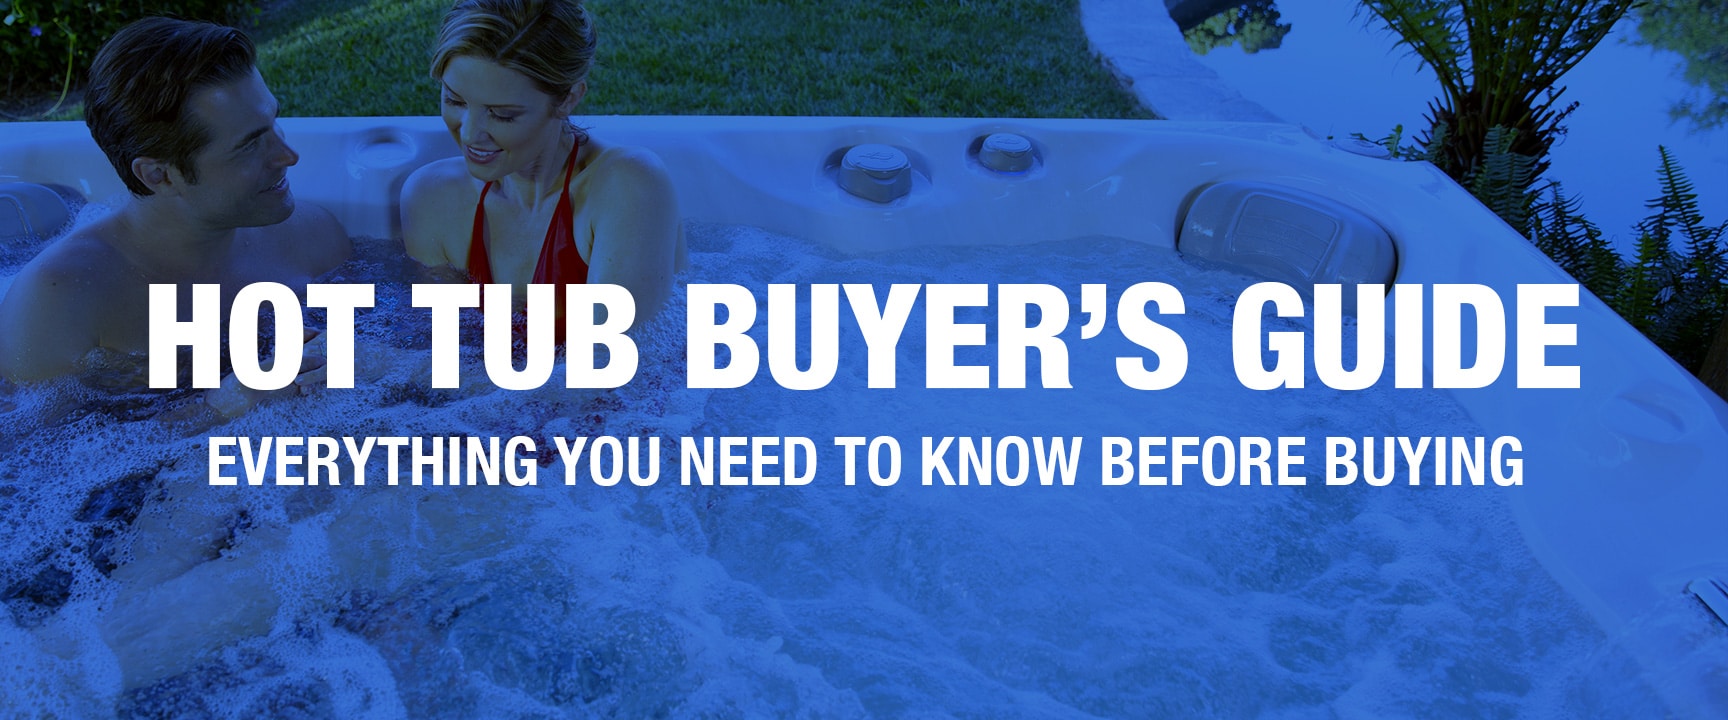 Hot Tub Buyer’s Guide